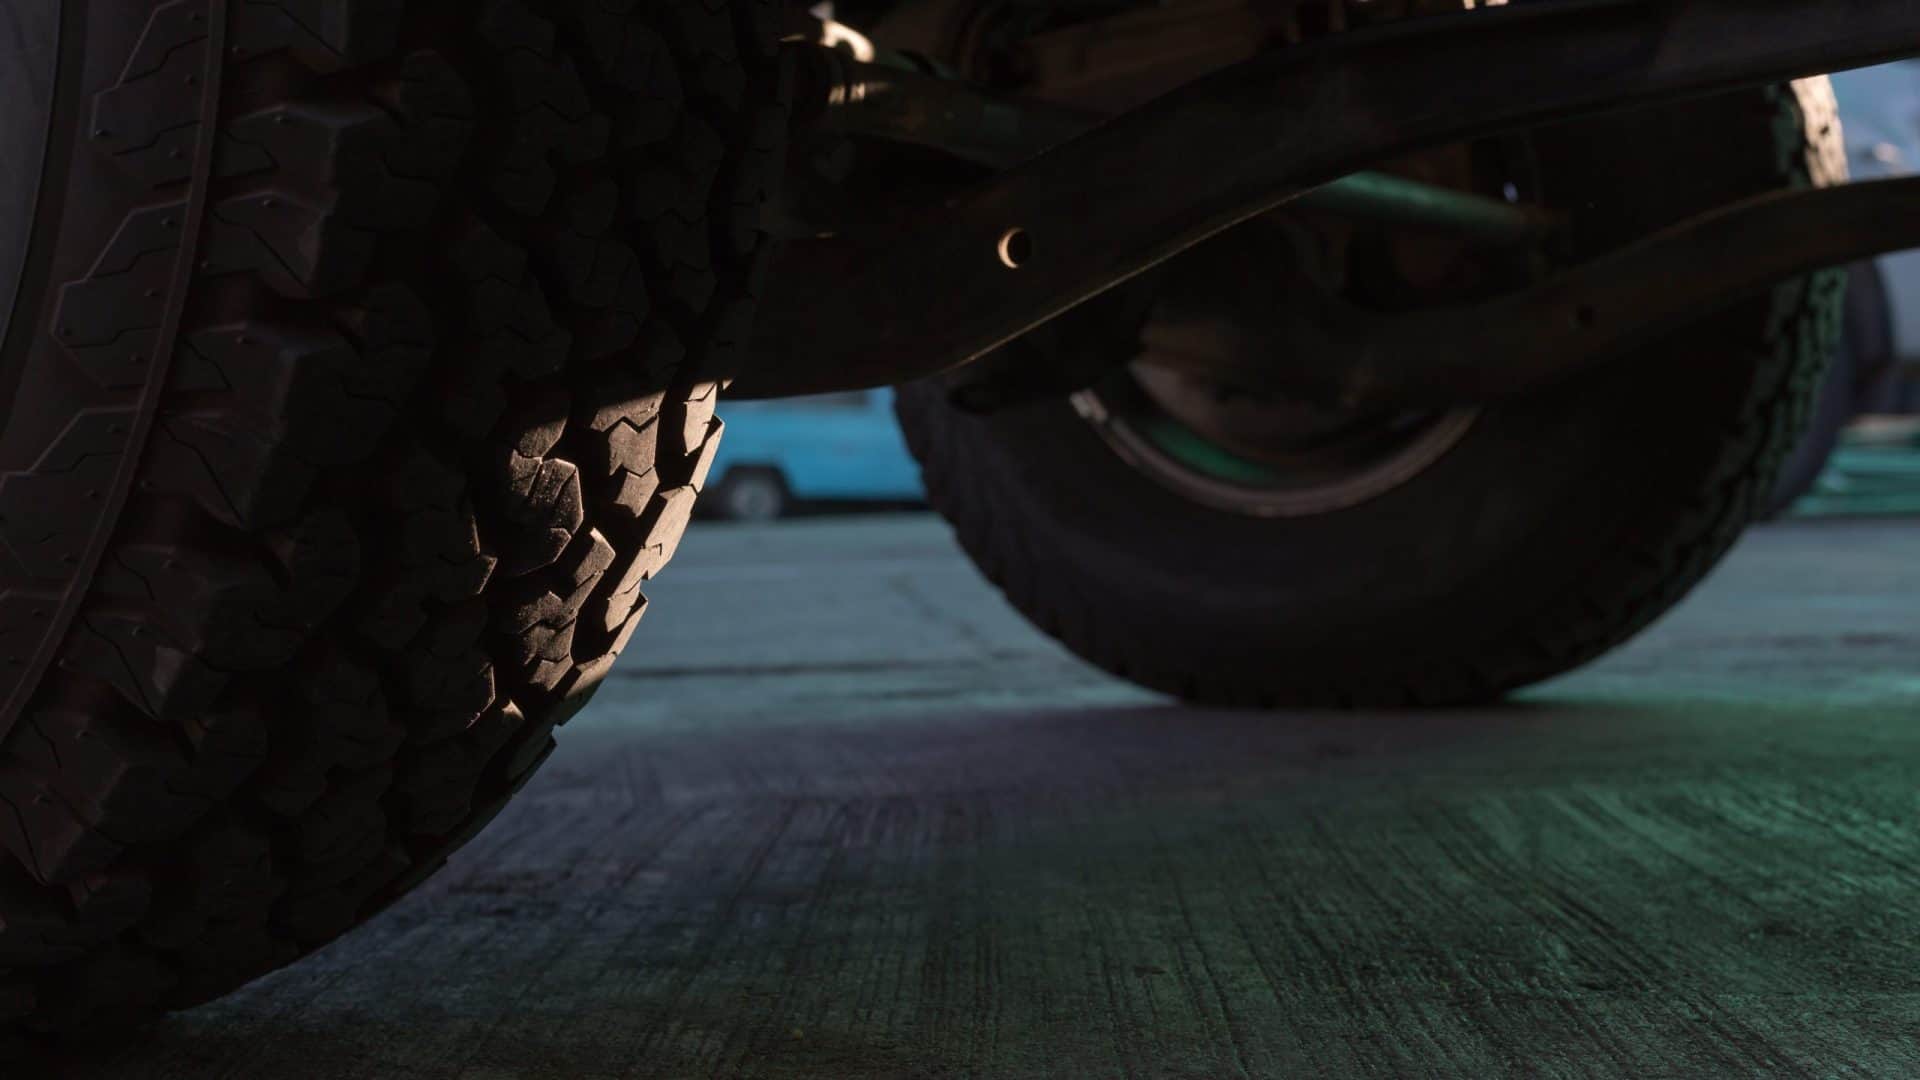 Does a leveling kit affect ride quality